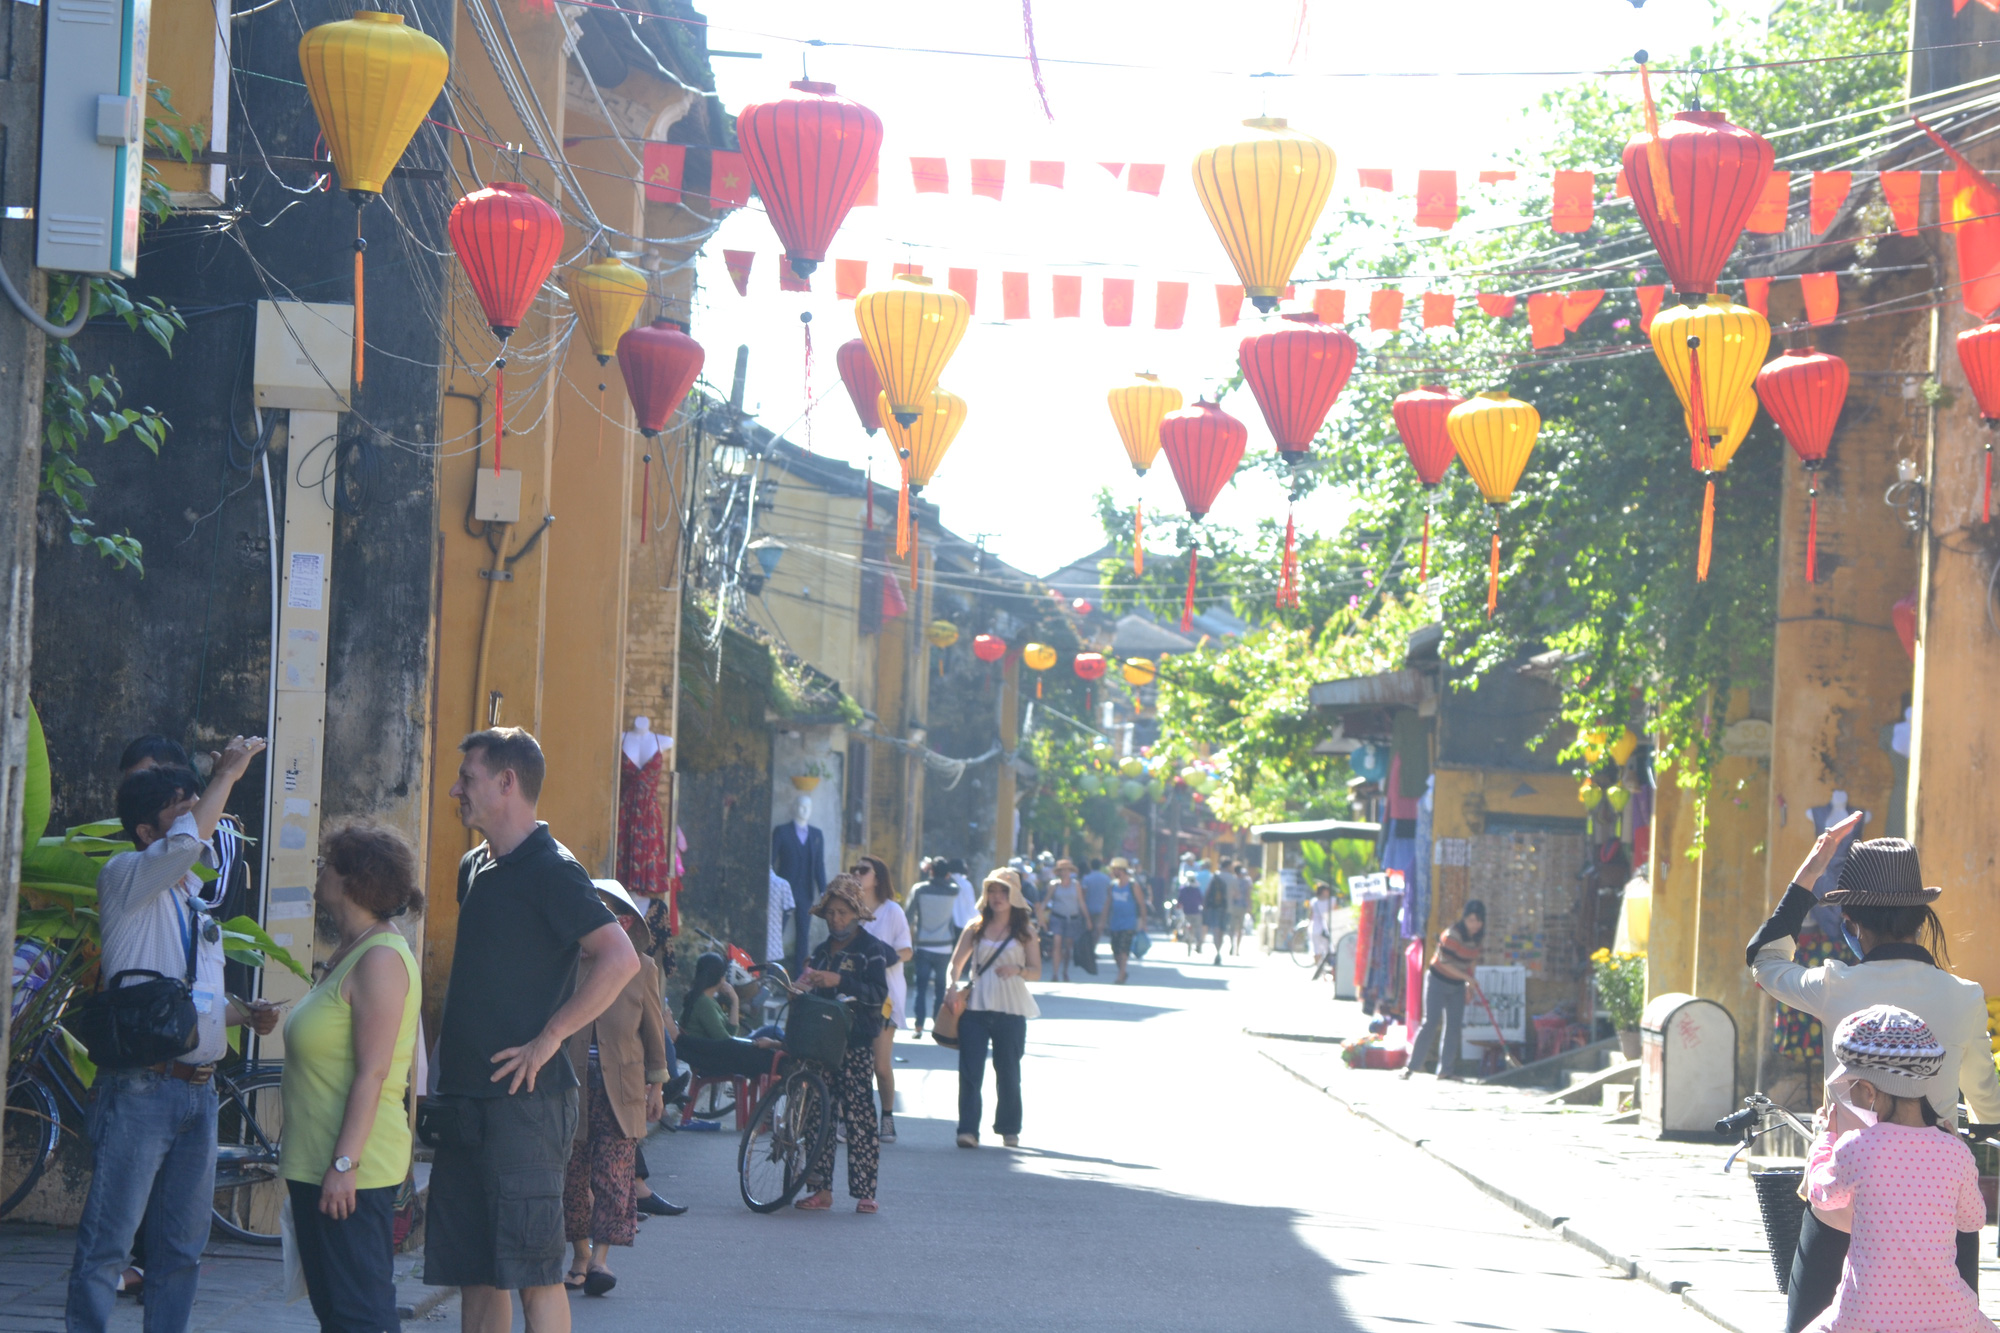 Social distancing rules reinstated in Hoi An to prevent COVID-19 spread